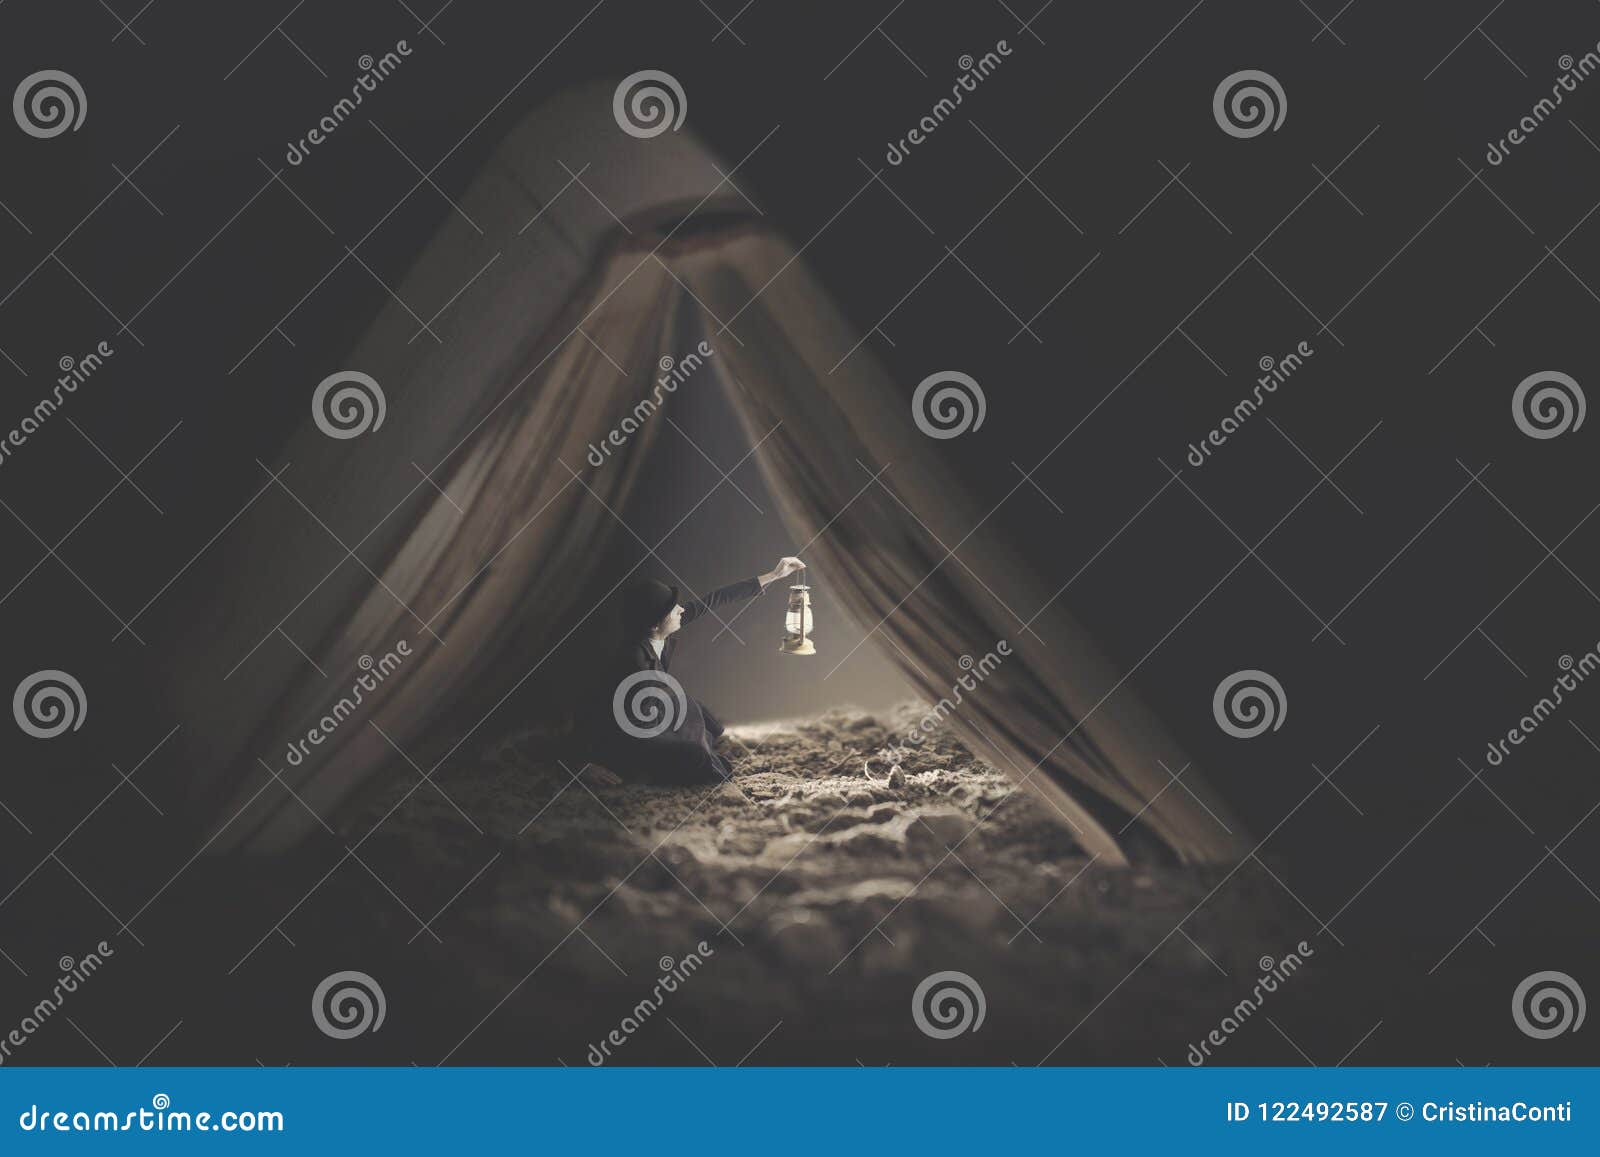 surreal image of a tiny woman who uses a book as a shelter for the night